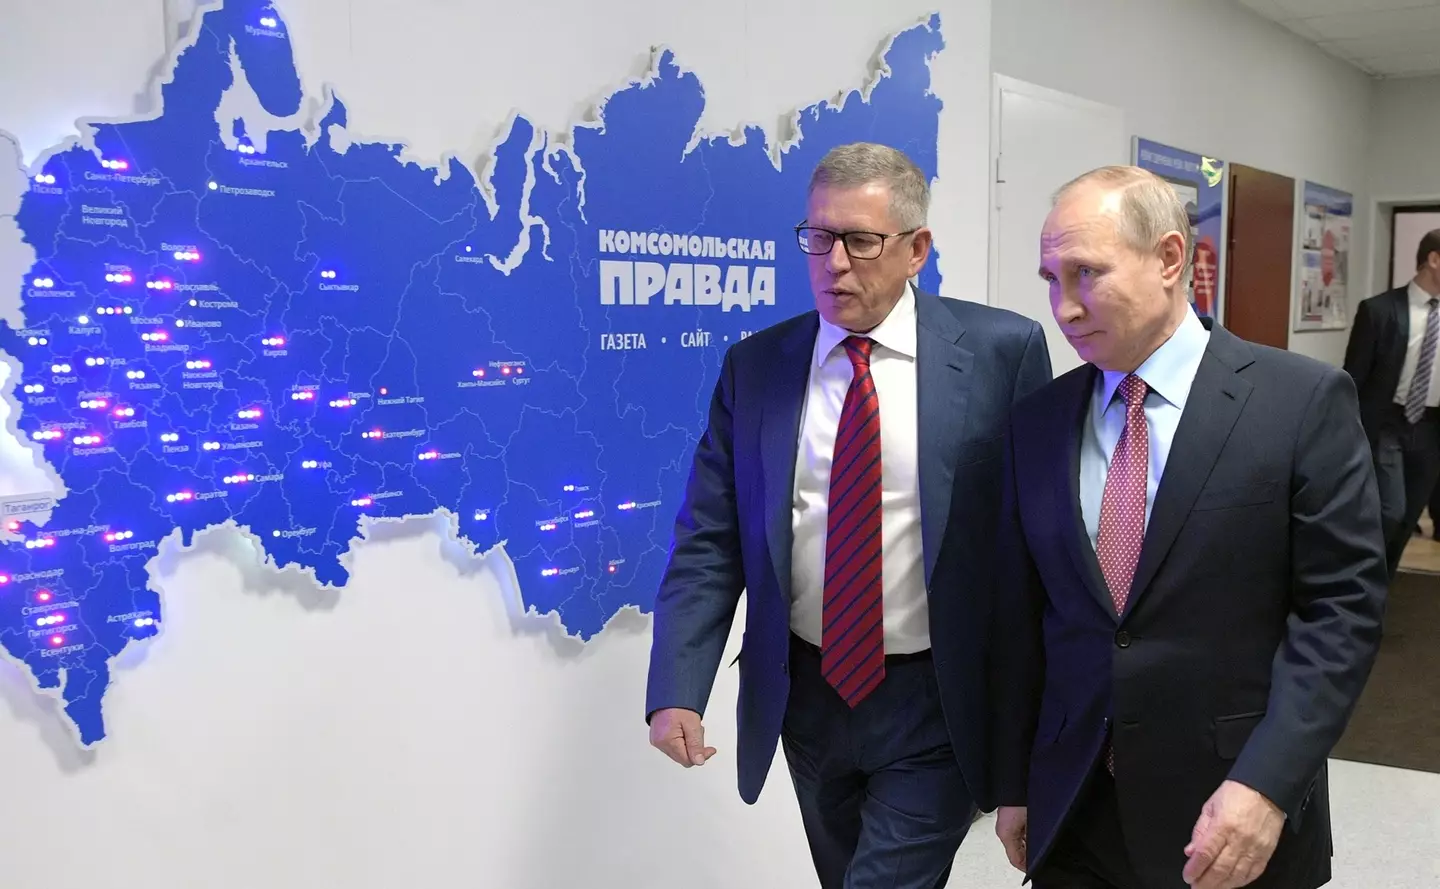 Russian President Vladimir Putin with Vladimir Sungorkin prior to a meeting with Russian journalists in 2018.